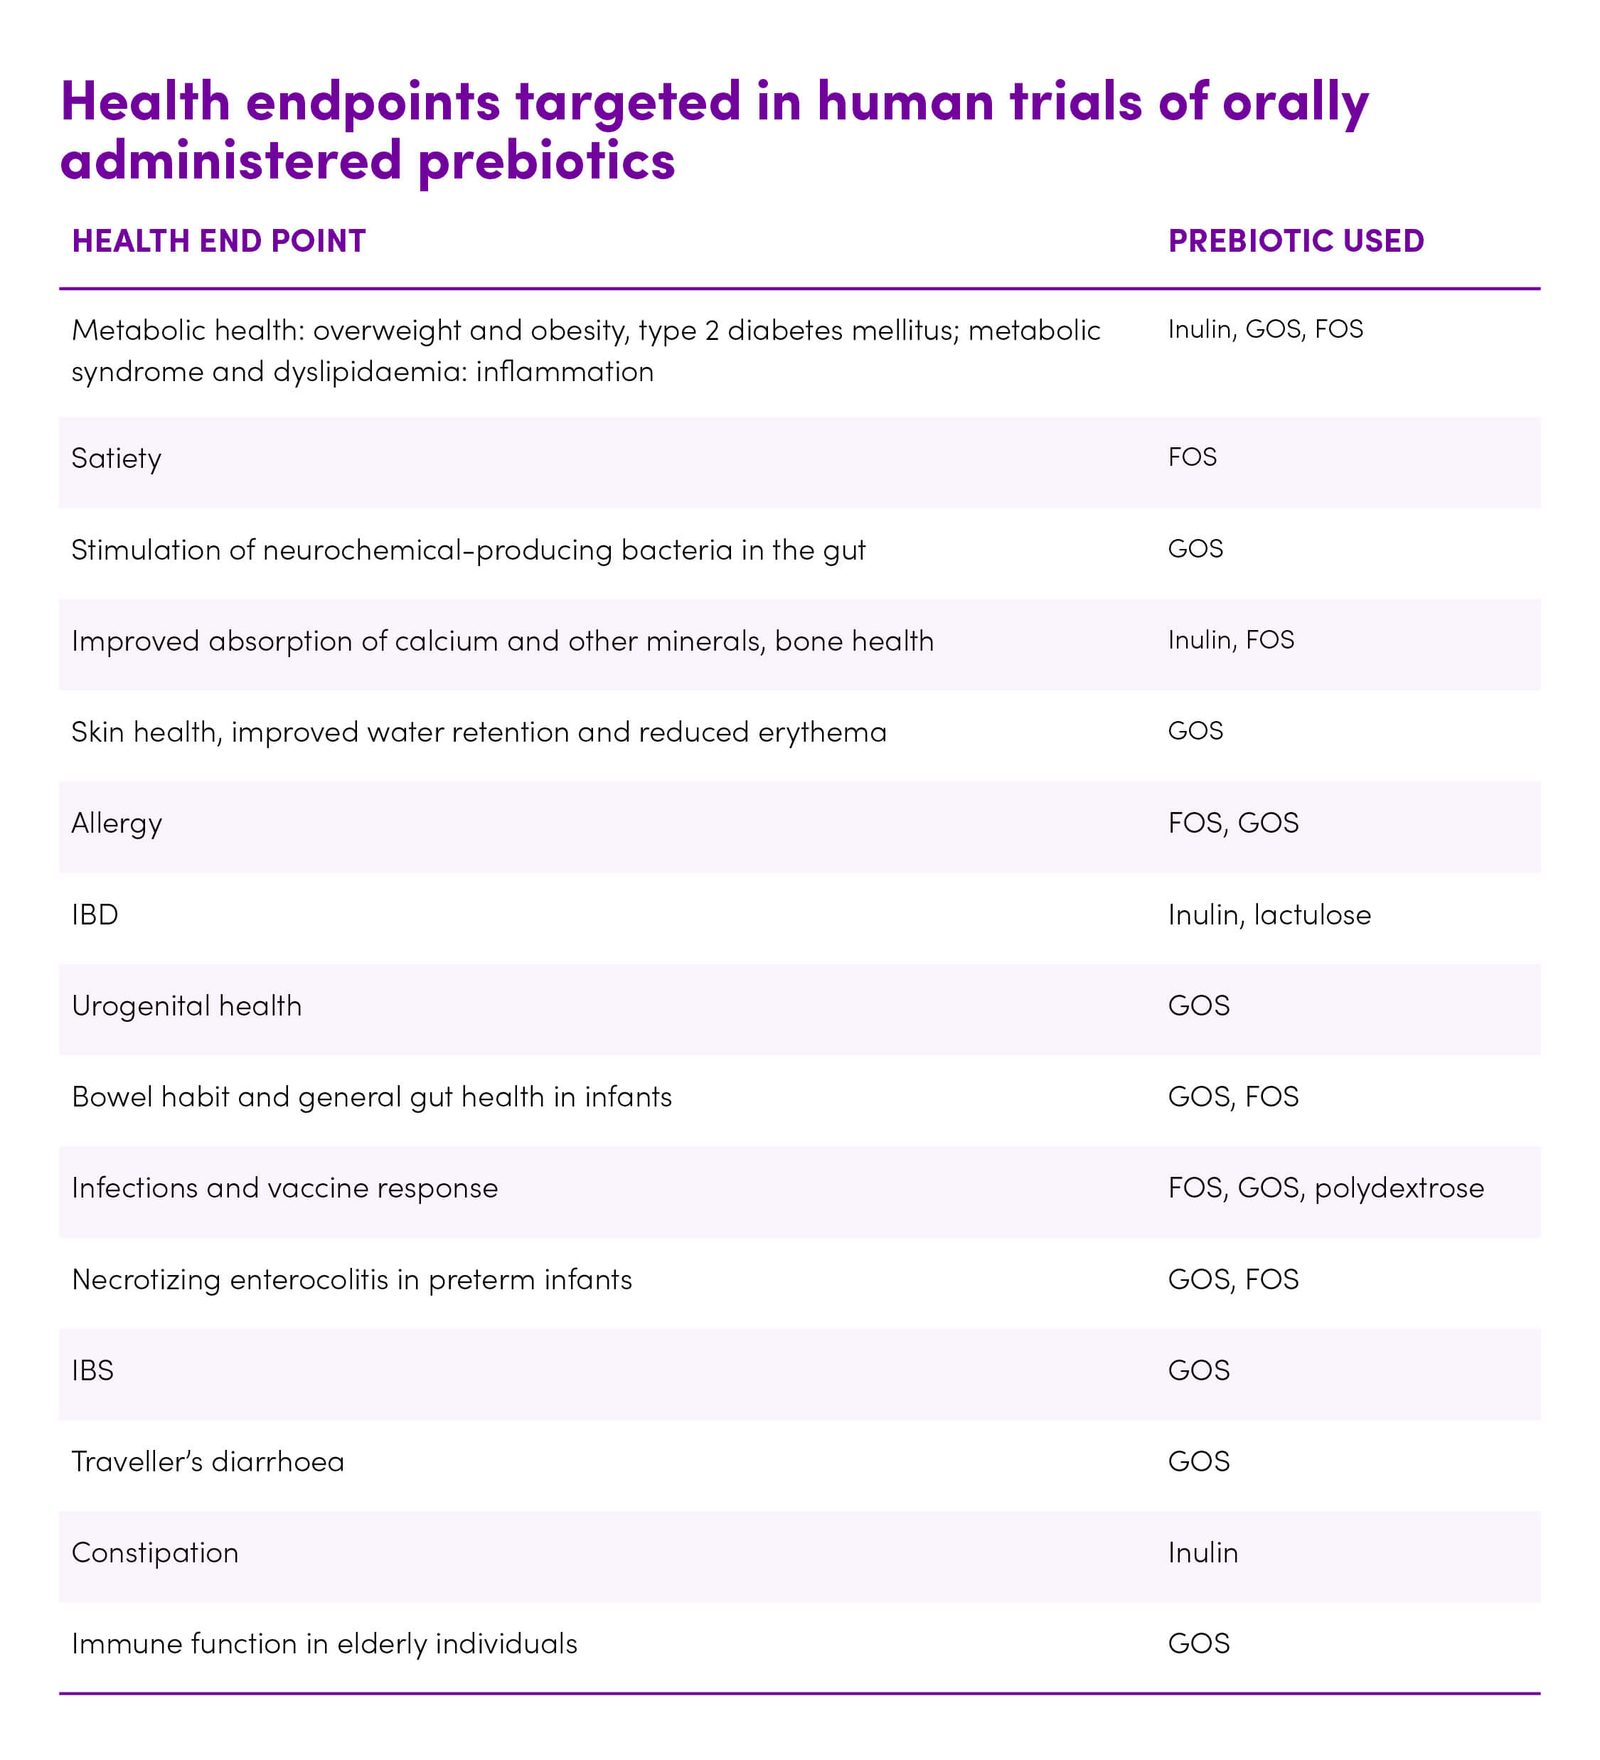 Health endpoints targeted in human trials of orally administered prebiotics